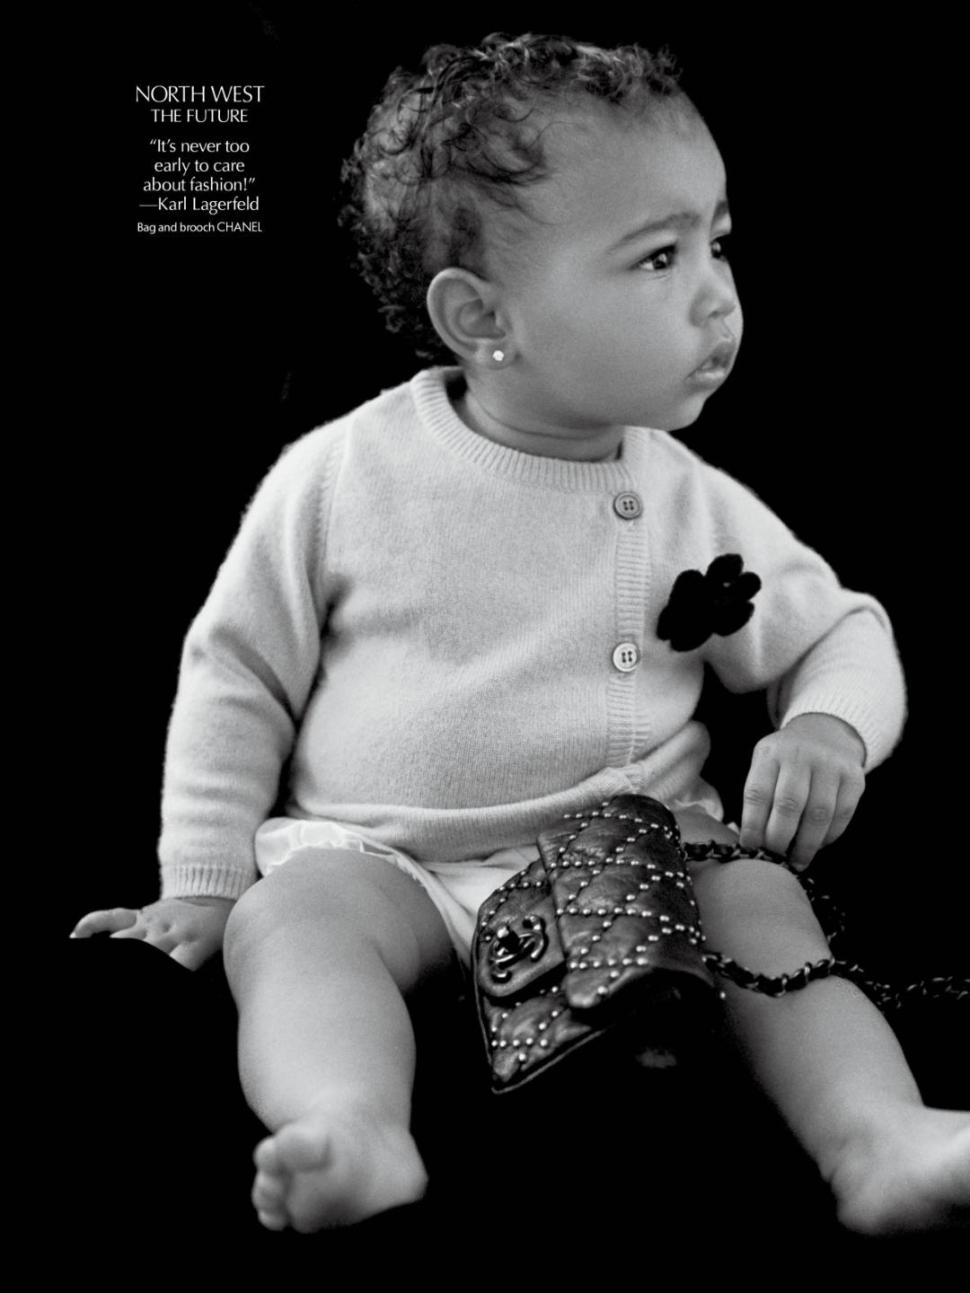 Kim Kardashian and Kanye West’s daughter, North West, goes with Chanel in CR Fashion Book.